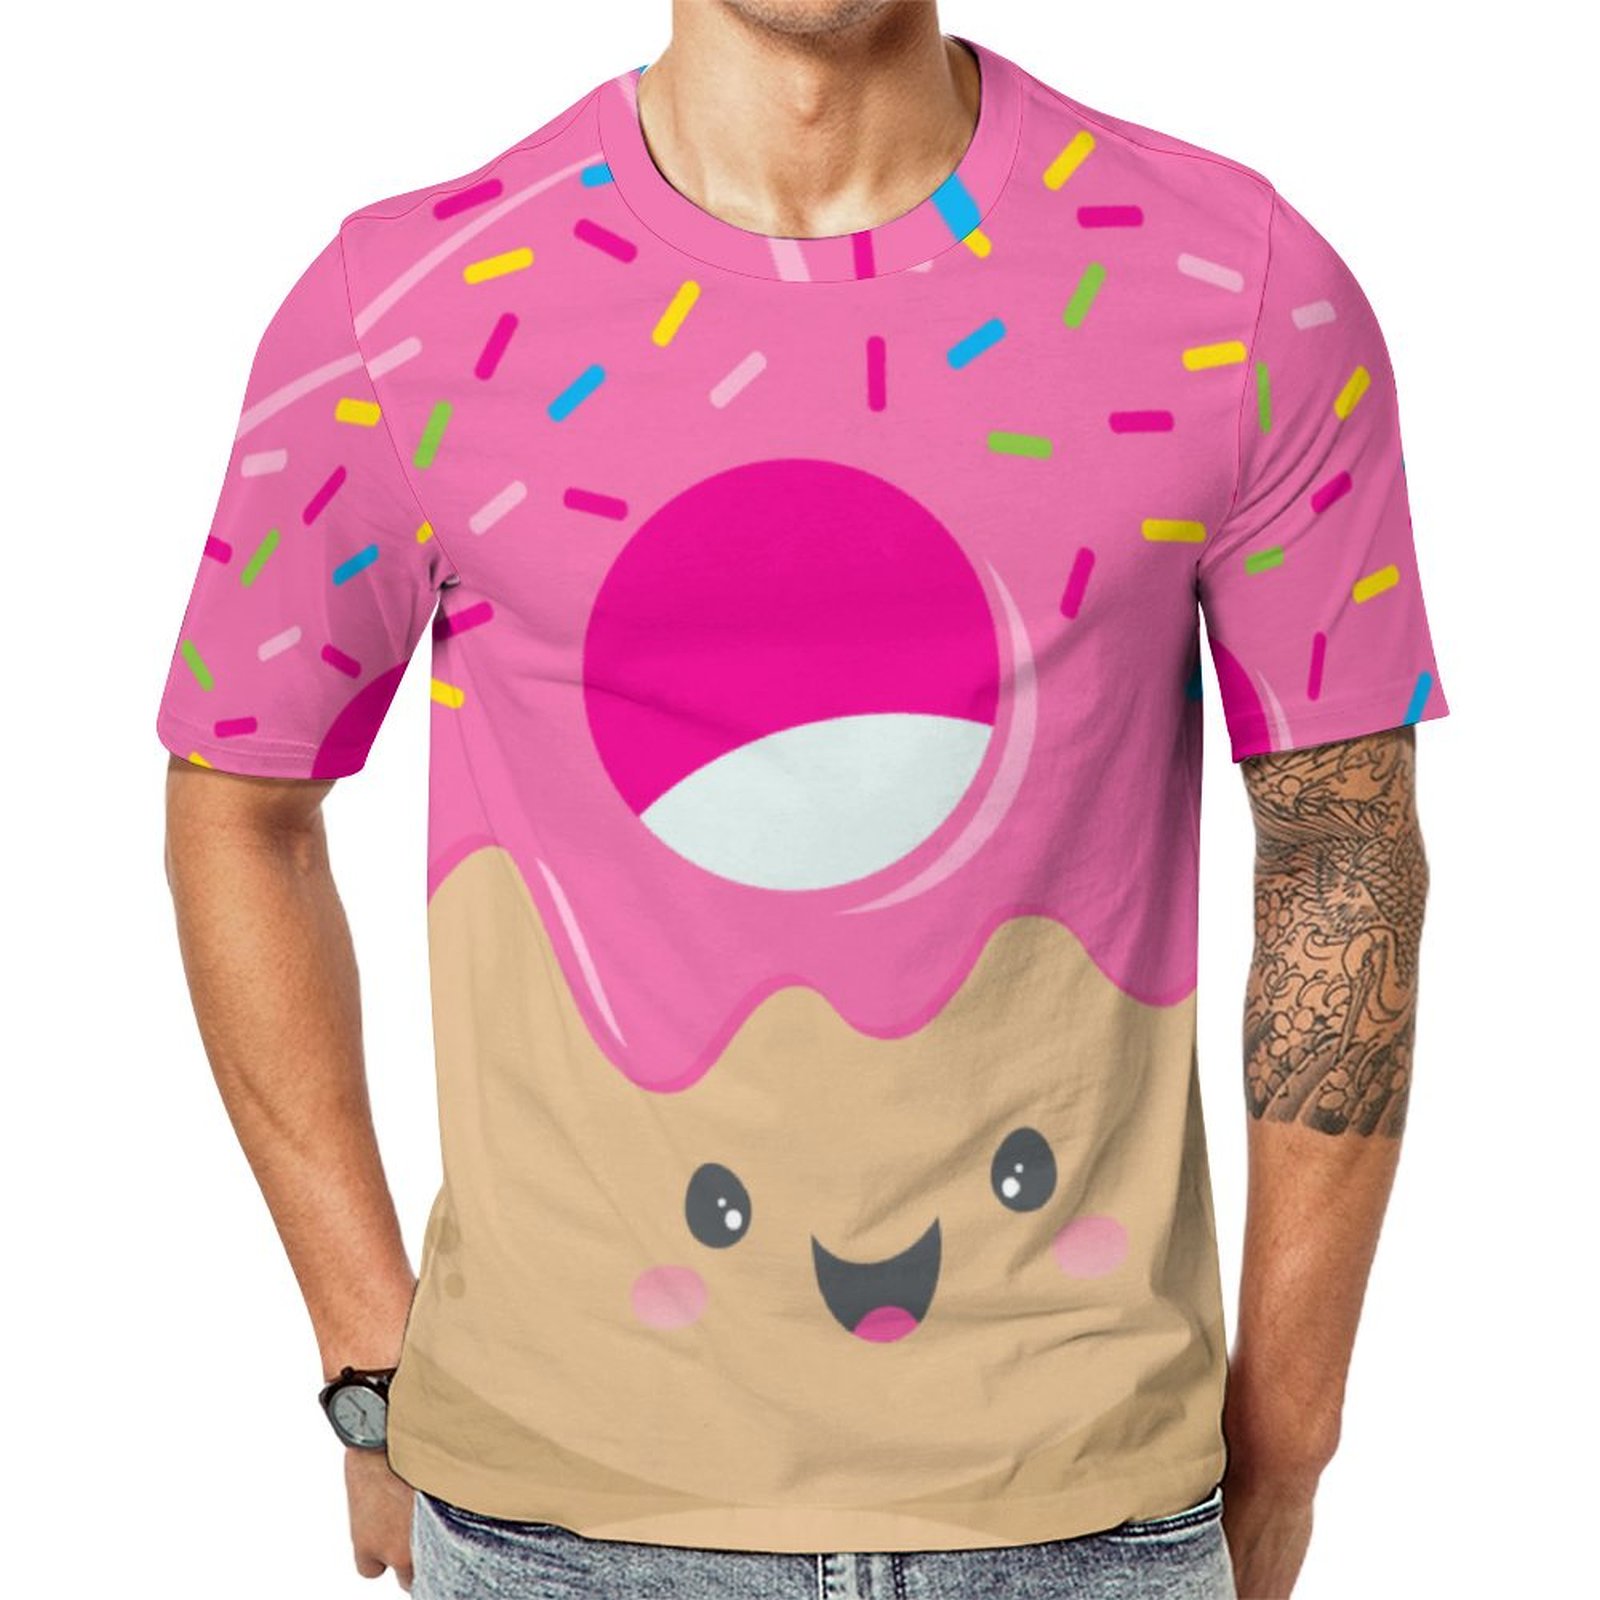 Kawaii Donut Delight Bold Colorful Sweet Sprinkles Short Sleeve Print Unisex Tshirt Summer Casual Tees for Men and Women Coolcoshirts